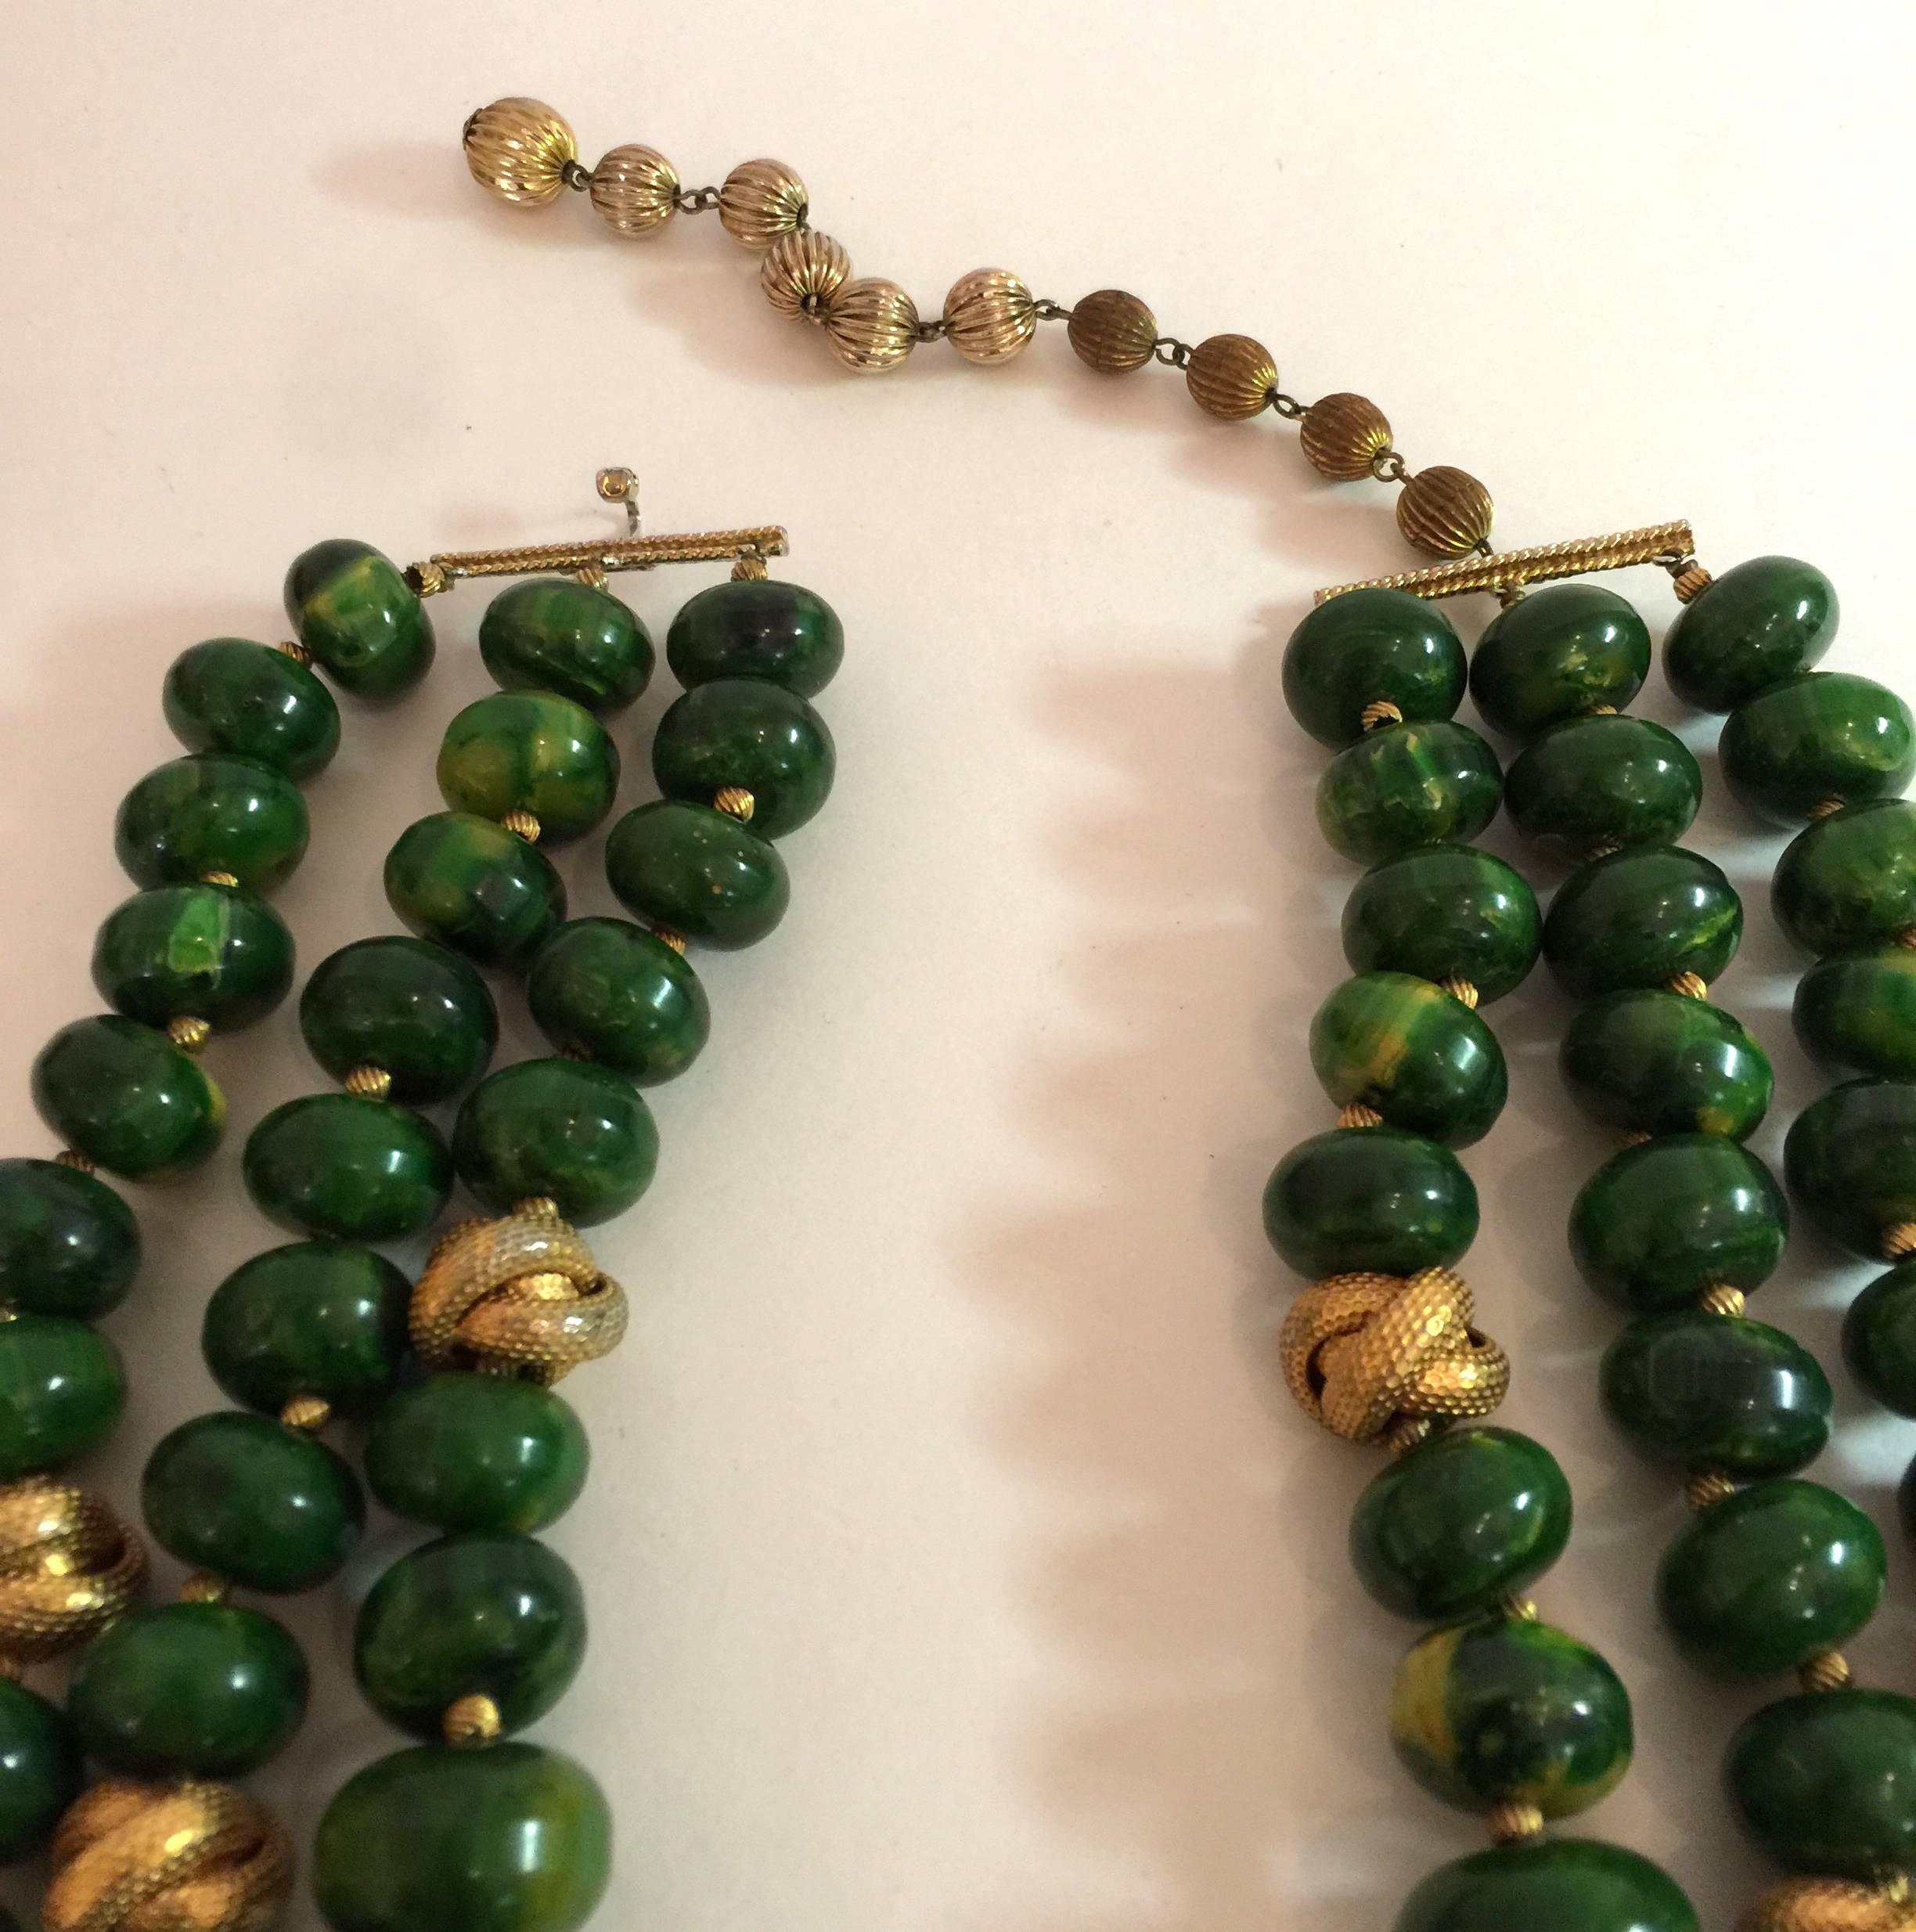 3 bead necklace